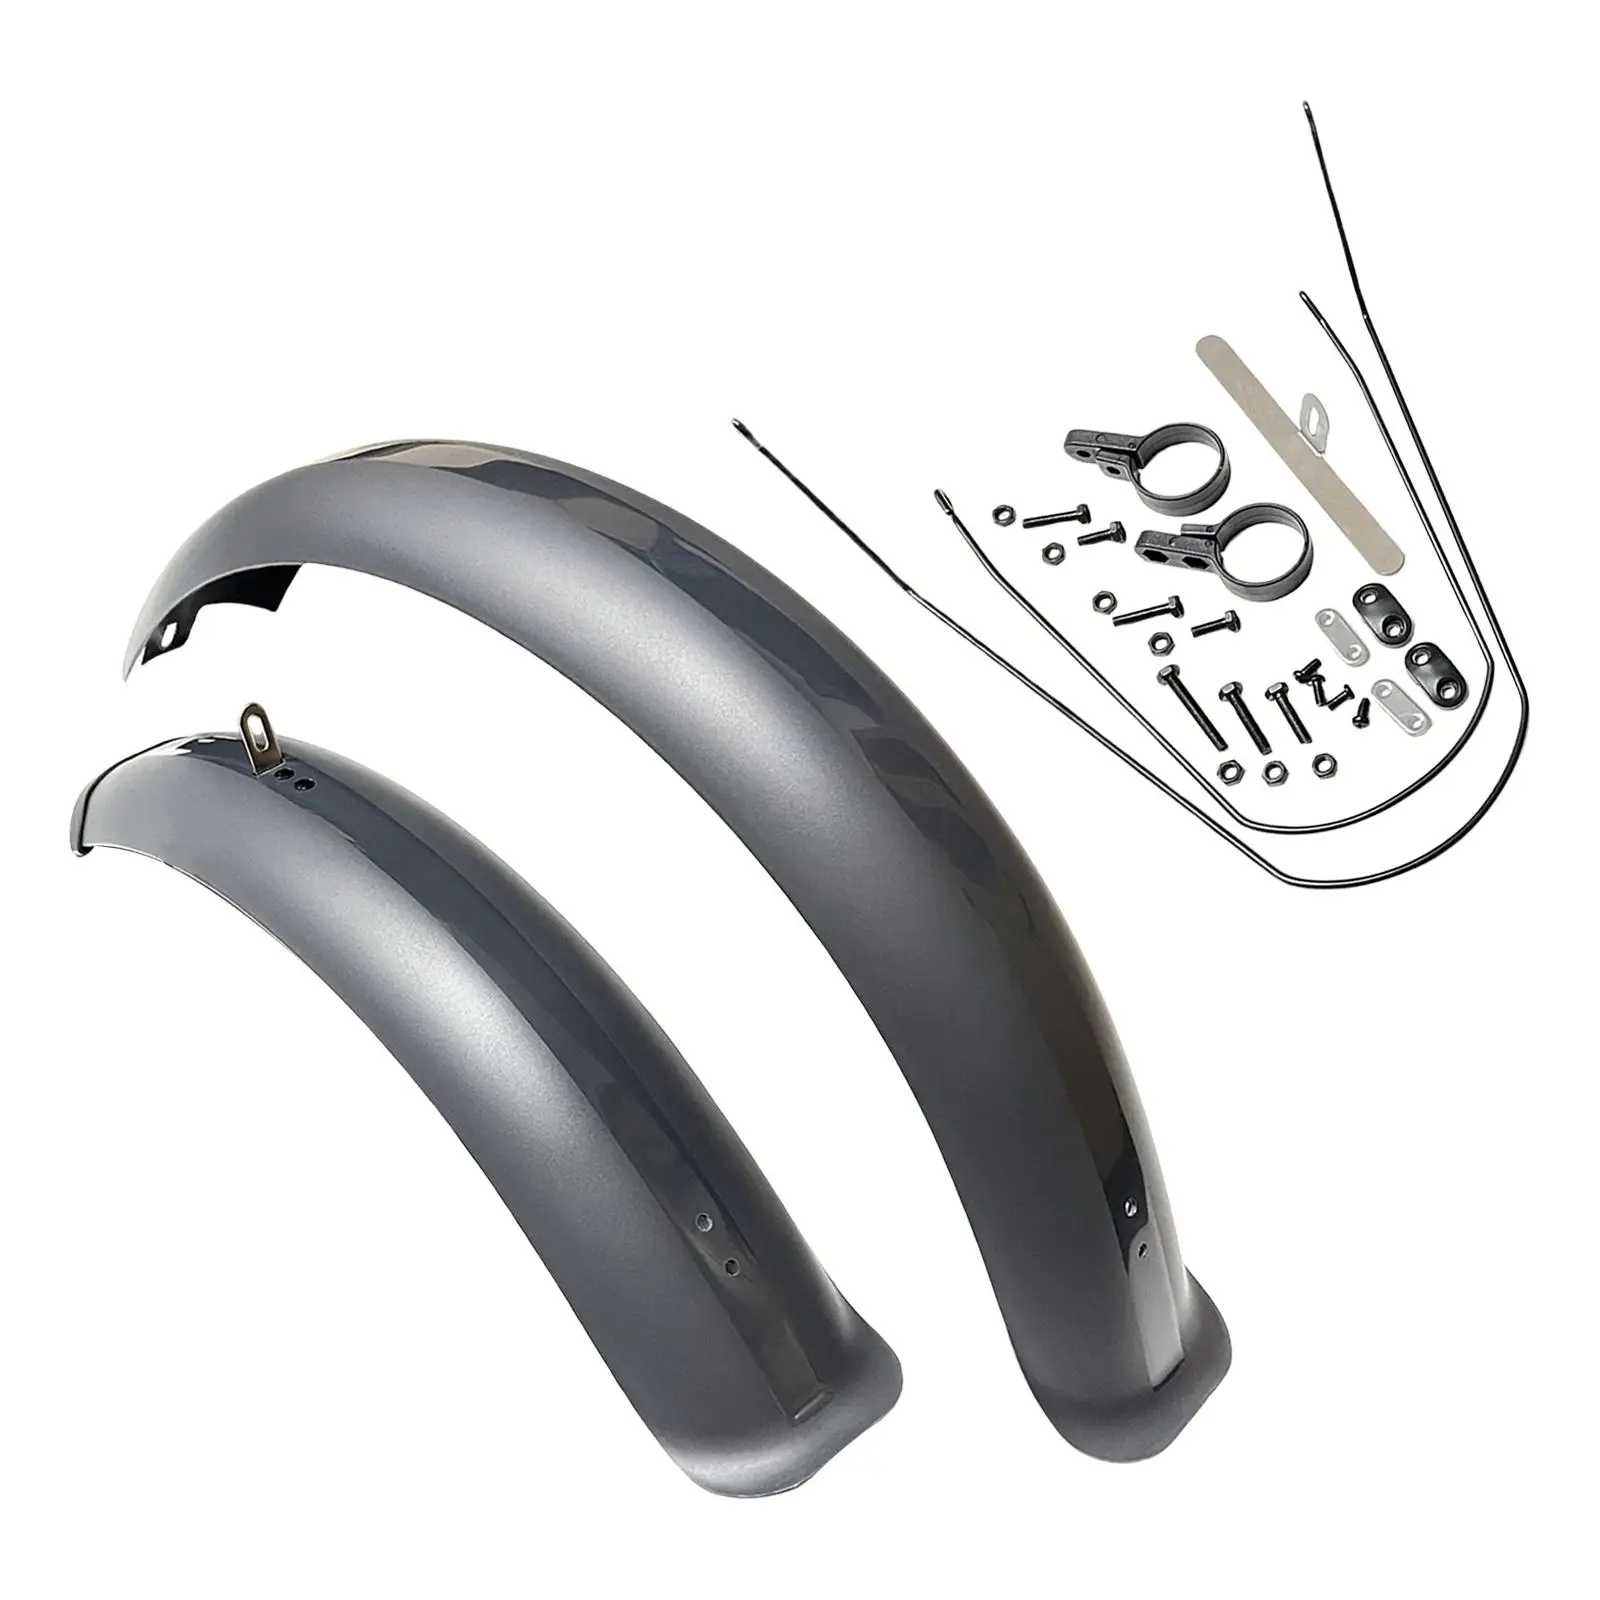 Bike Mudguard Front Rear Set Easy to Install Widen for Mountain Bike Riding